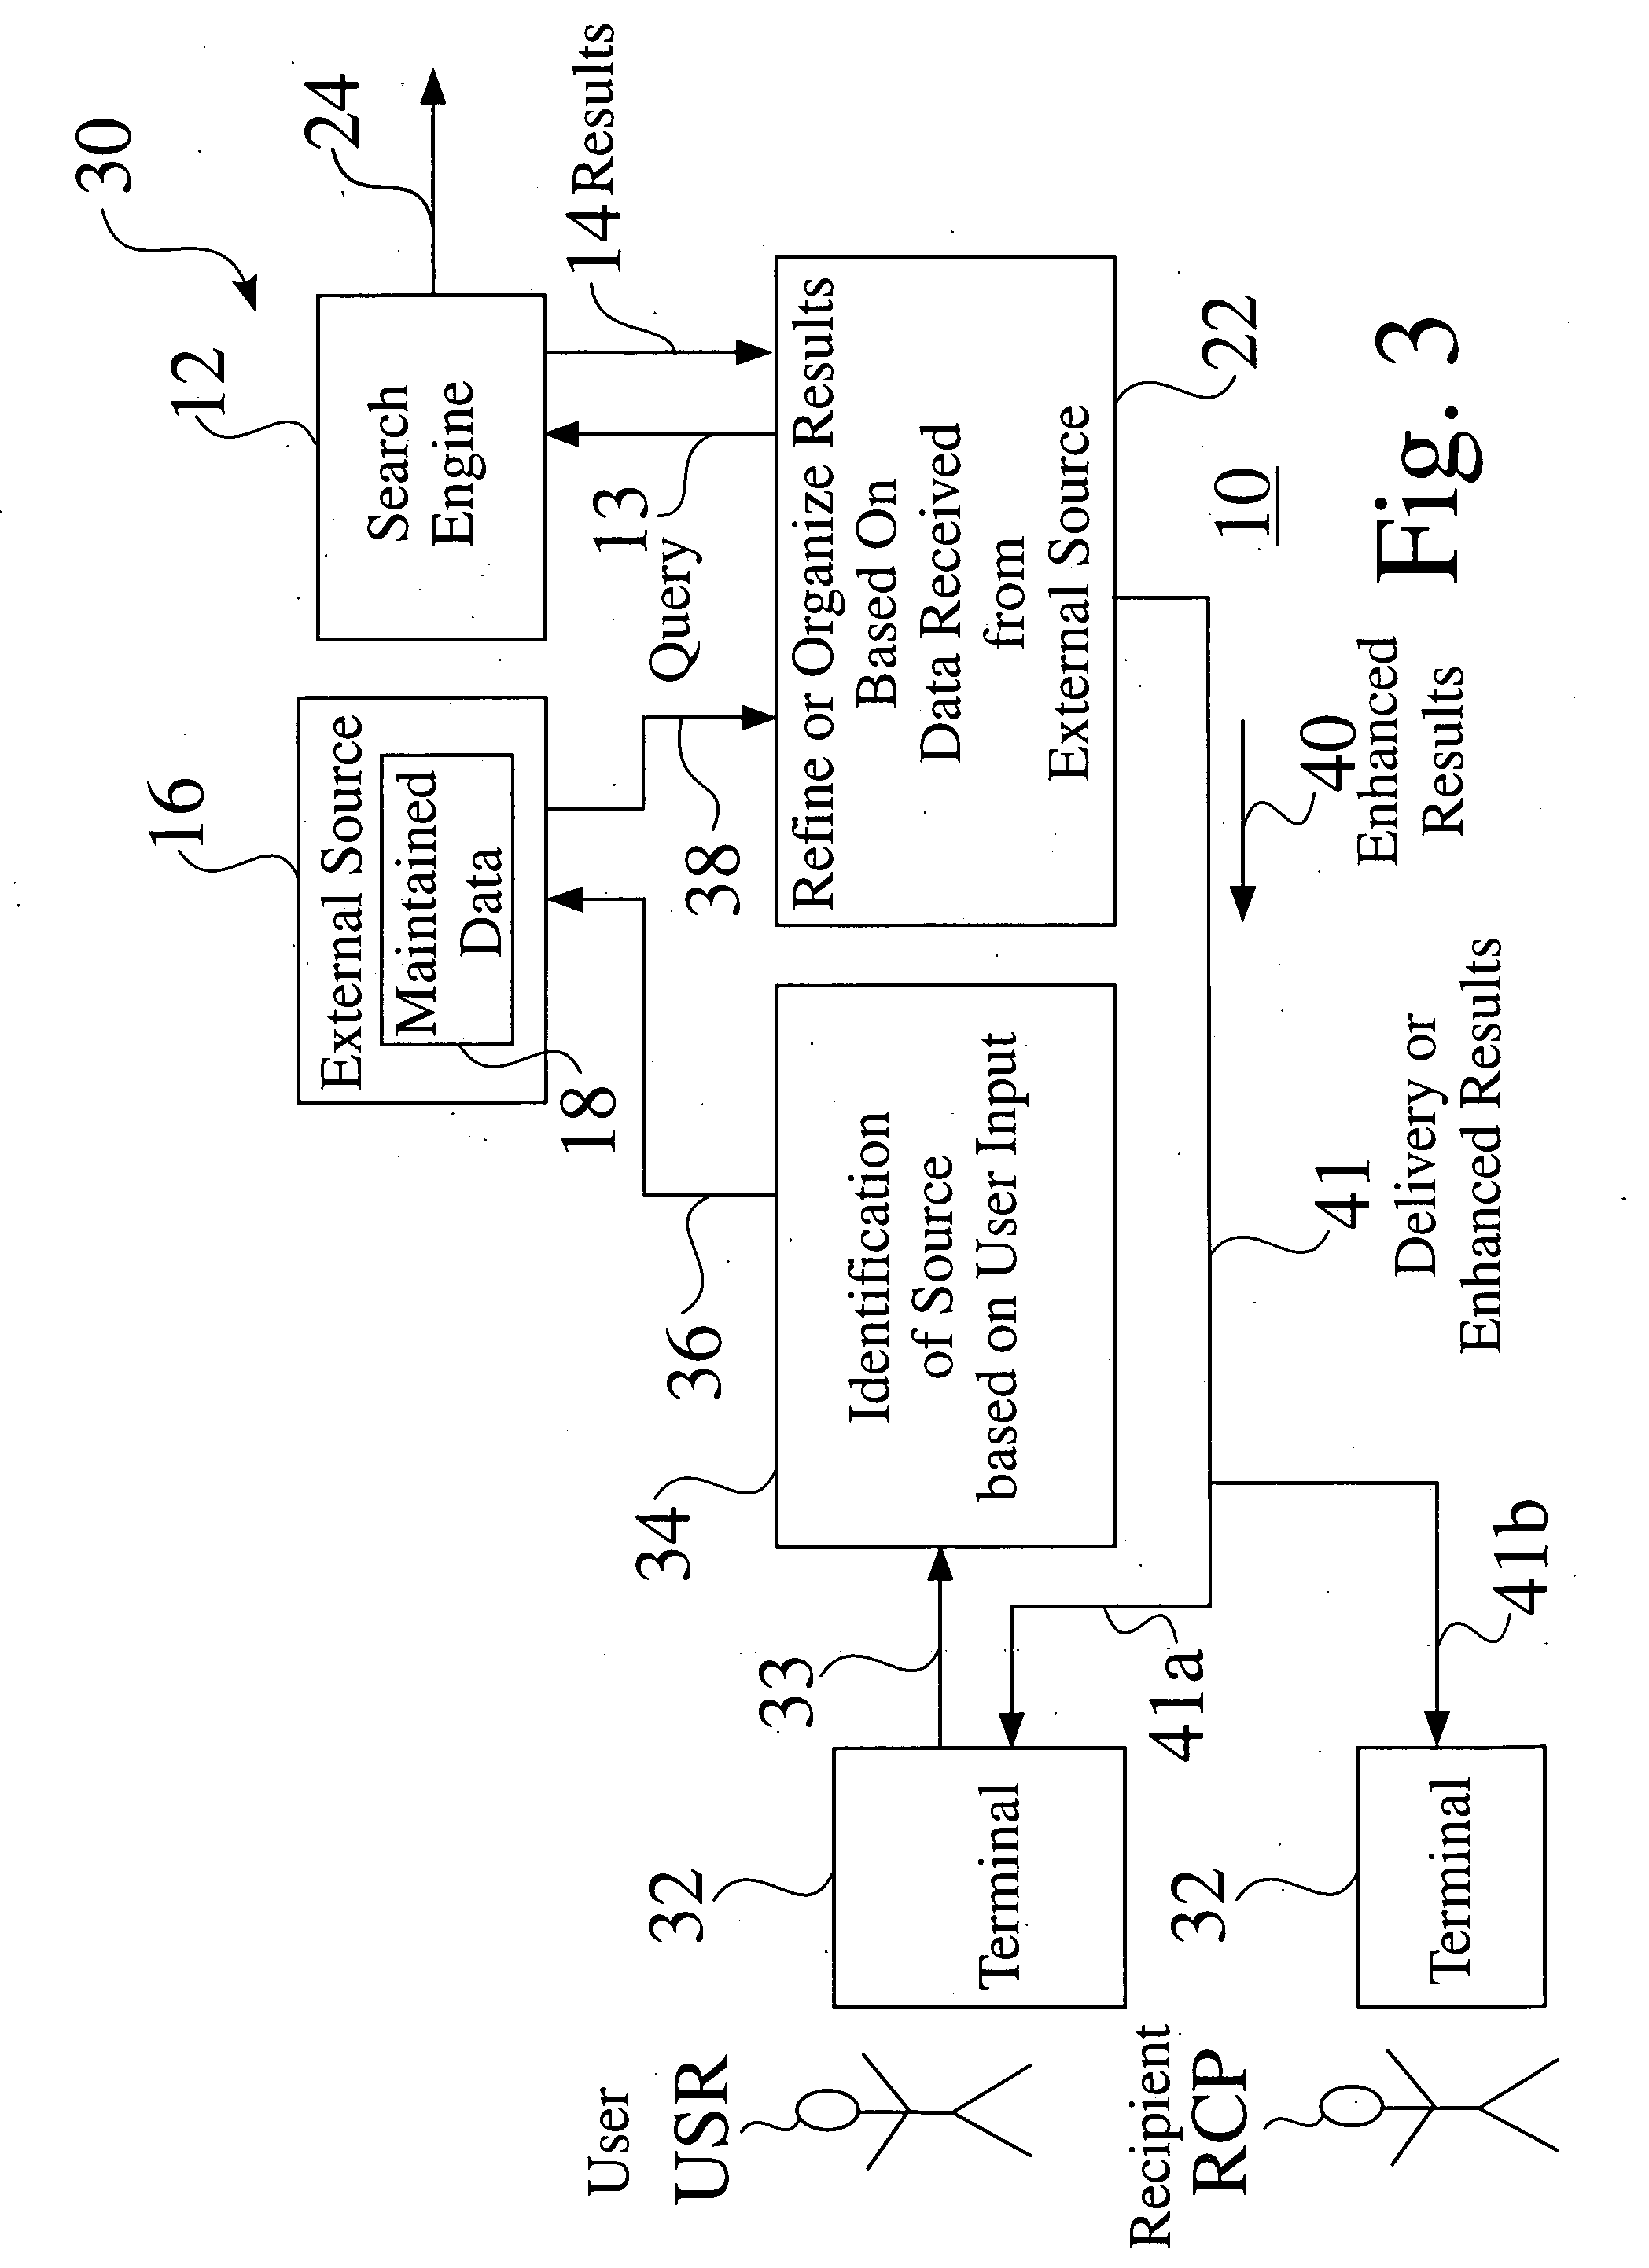 Search enhancement system with information from a selected source